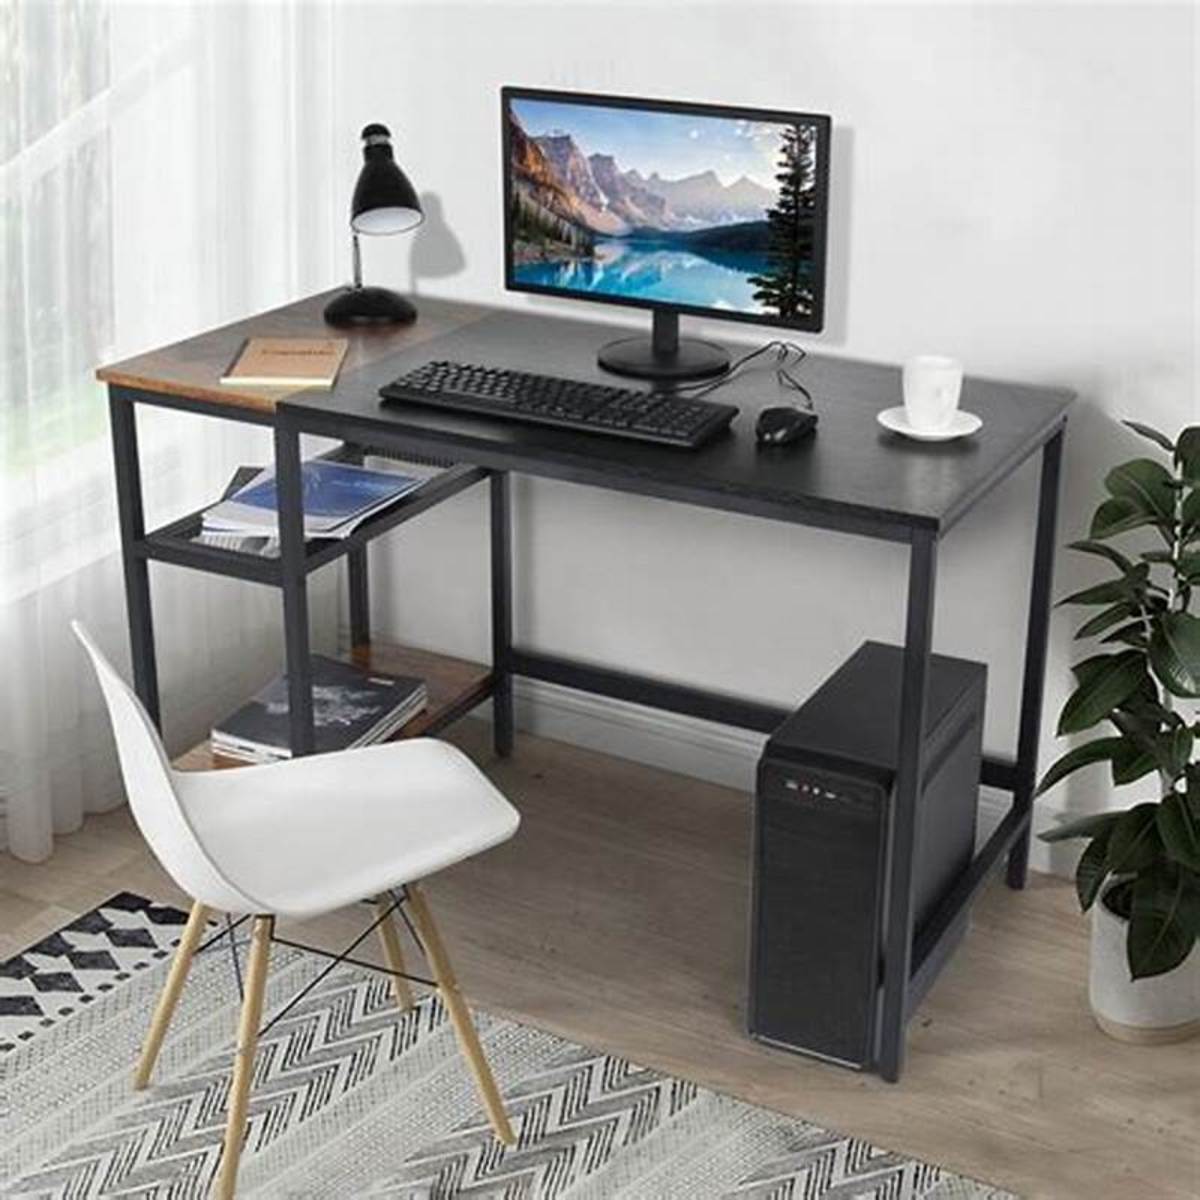 Choosing the Best Computer Desk for You and Your Home